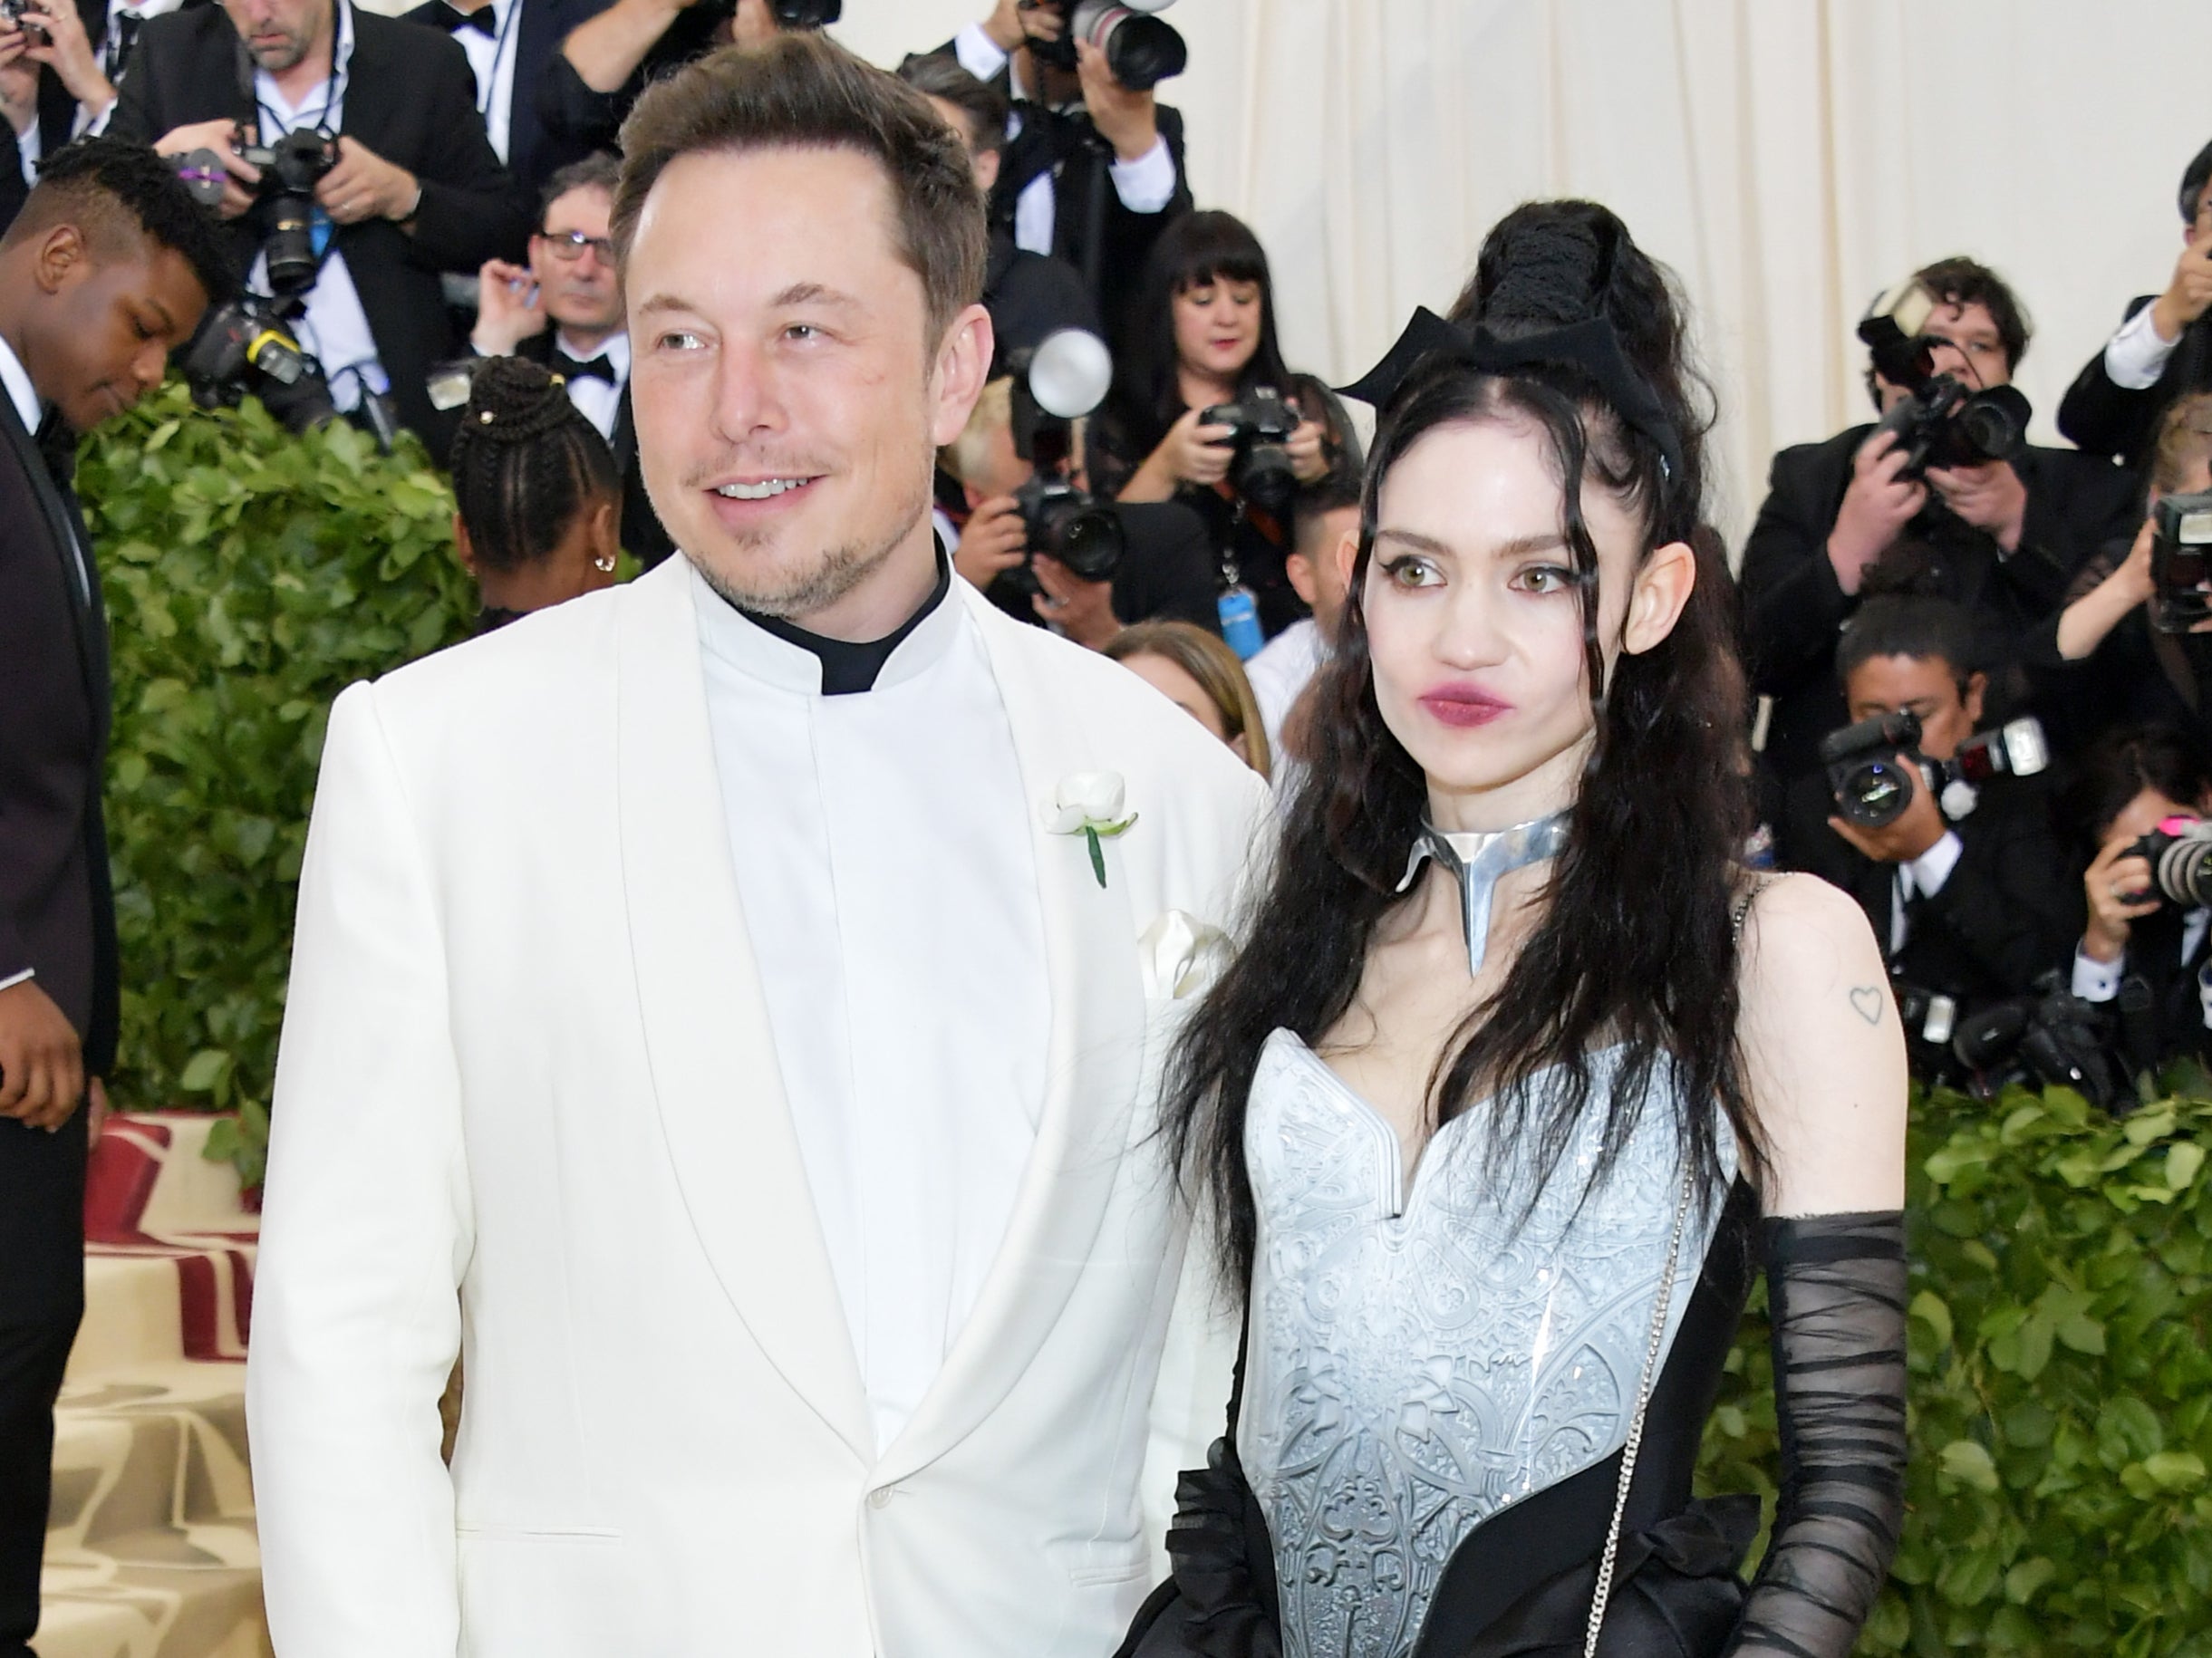 Elon Musk and Grimes began dating in 2018 and welcomed their first child together two years later